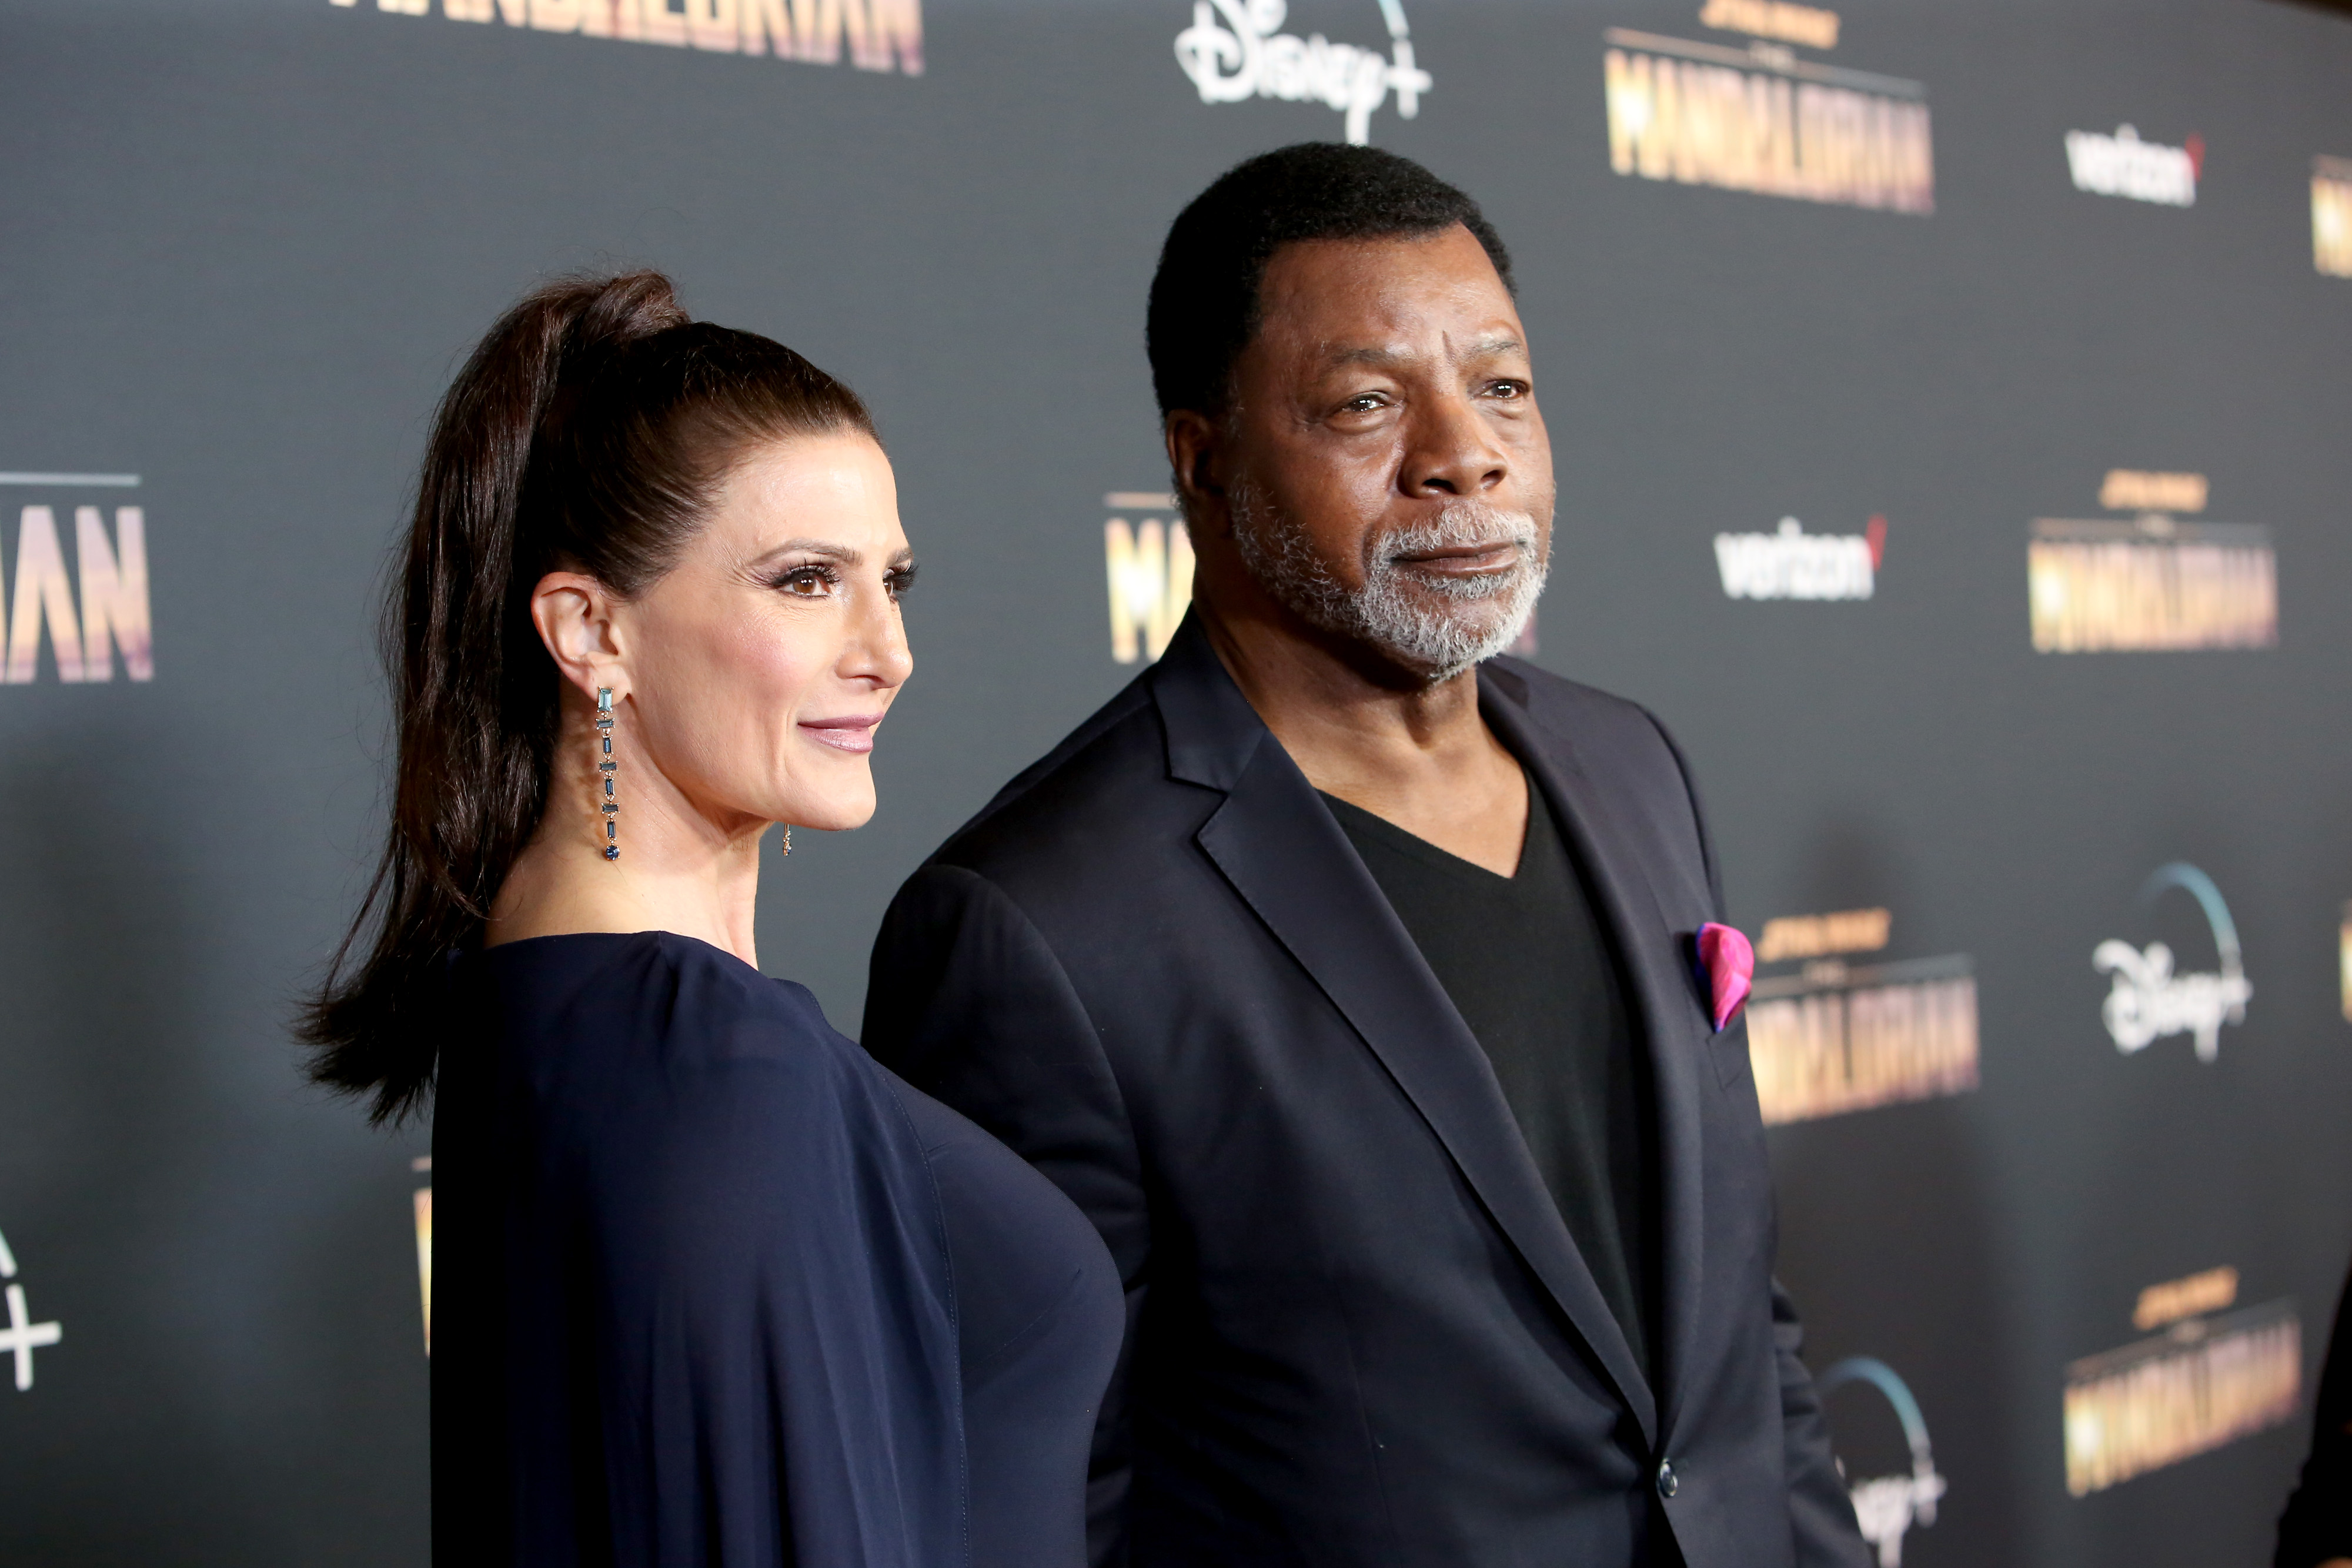 Christine Klvdjian and Carl Weathers arrive at the premiere of Lucasfilm's first-ever, live-action series, "The Mandalorian," at the El Capitan Theatre in Hollywood, Calif. on November 13, 2019. | Source: Getty Images